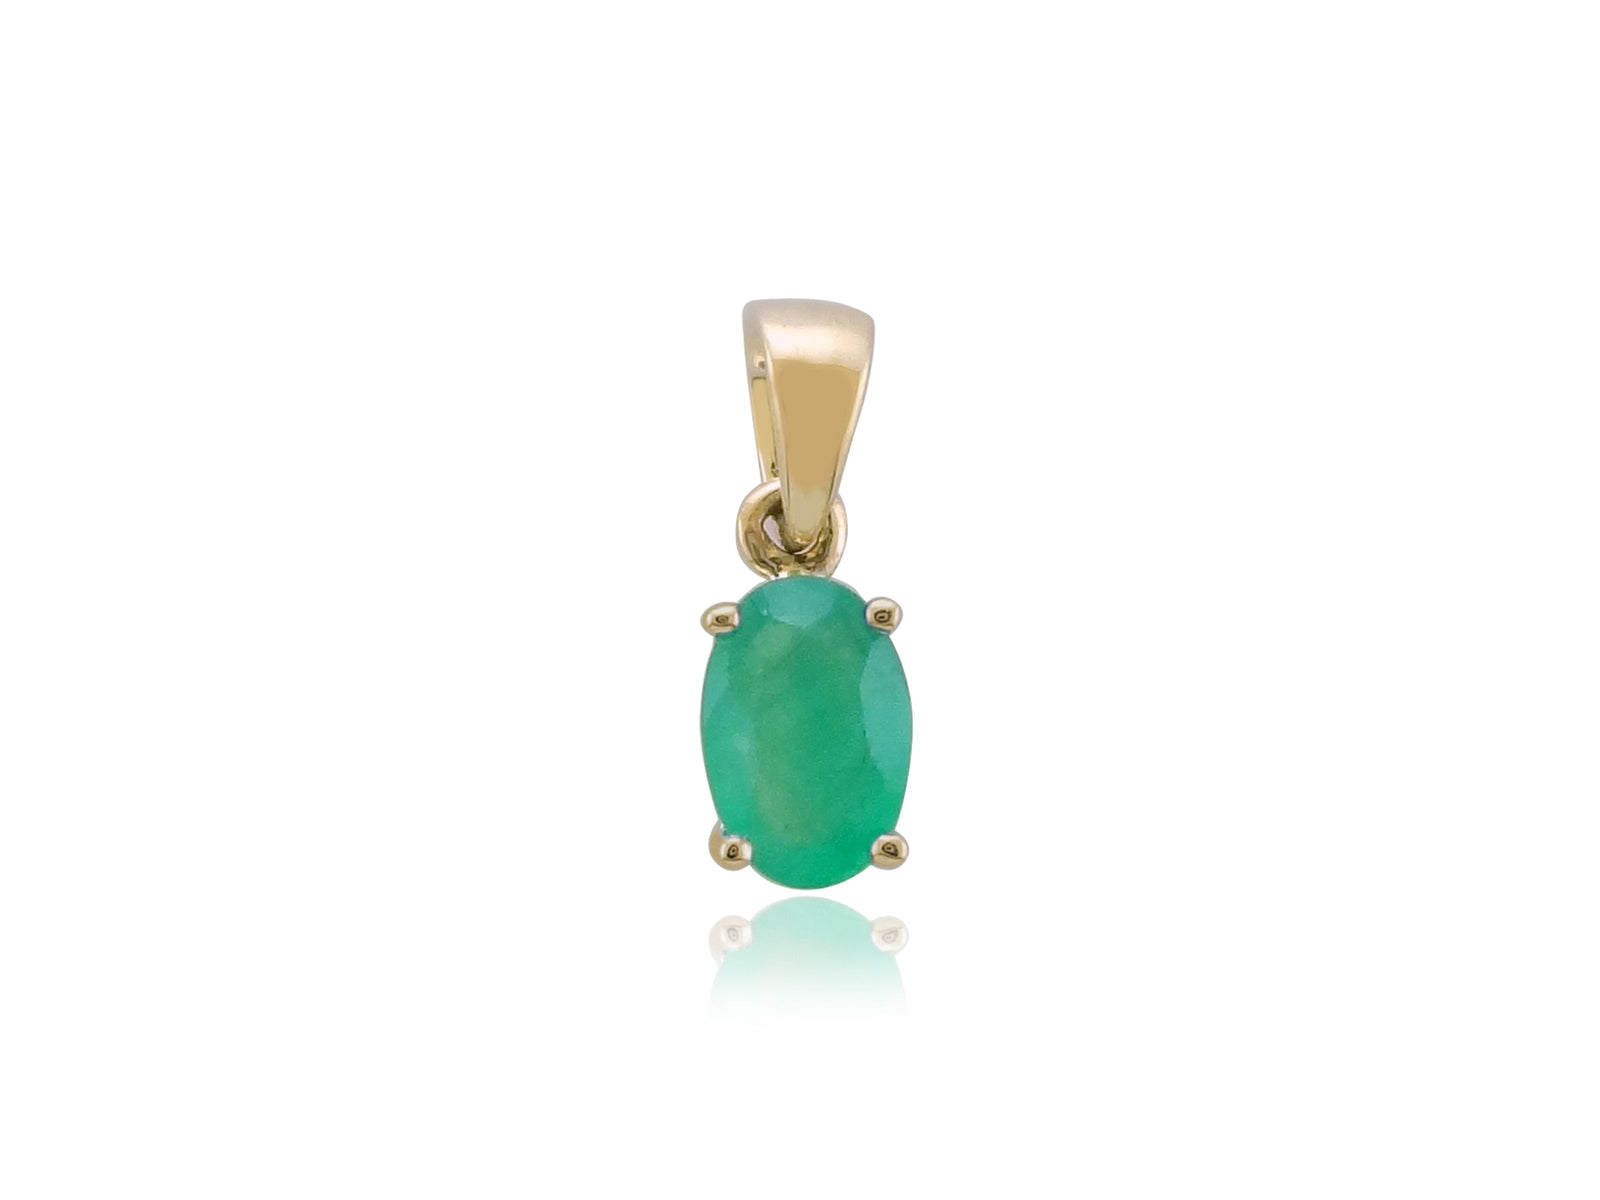 9ct gold 6x4mm oval emerald pendant